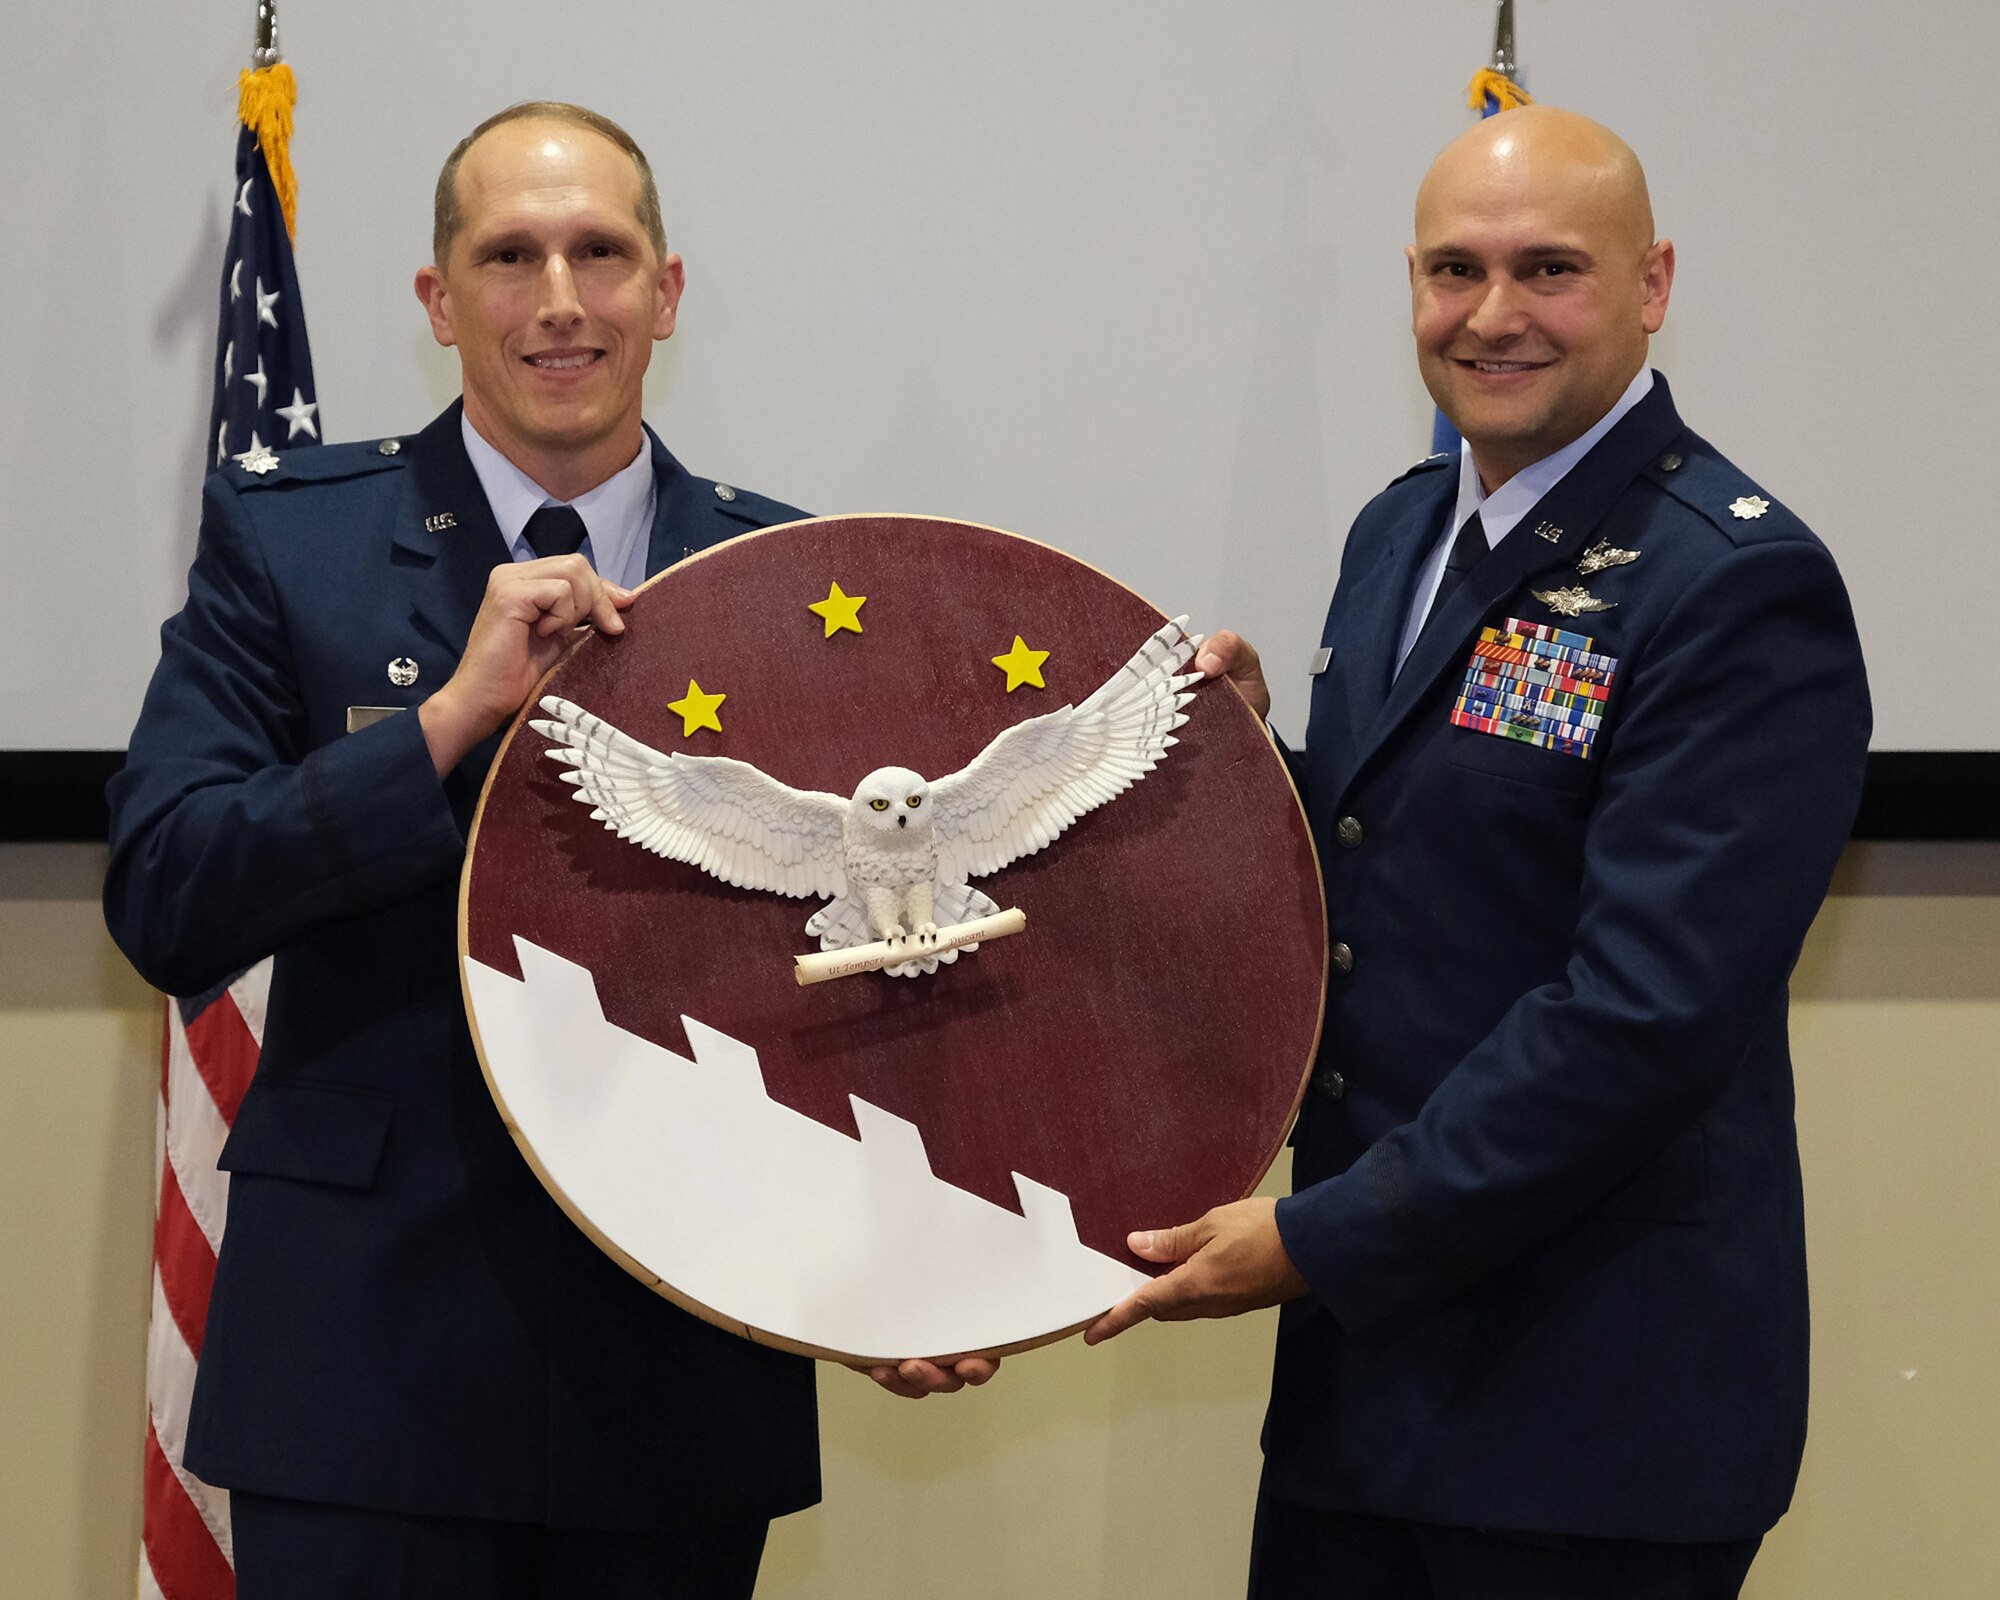 photo of two uniformed, US military members holding a plaque